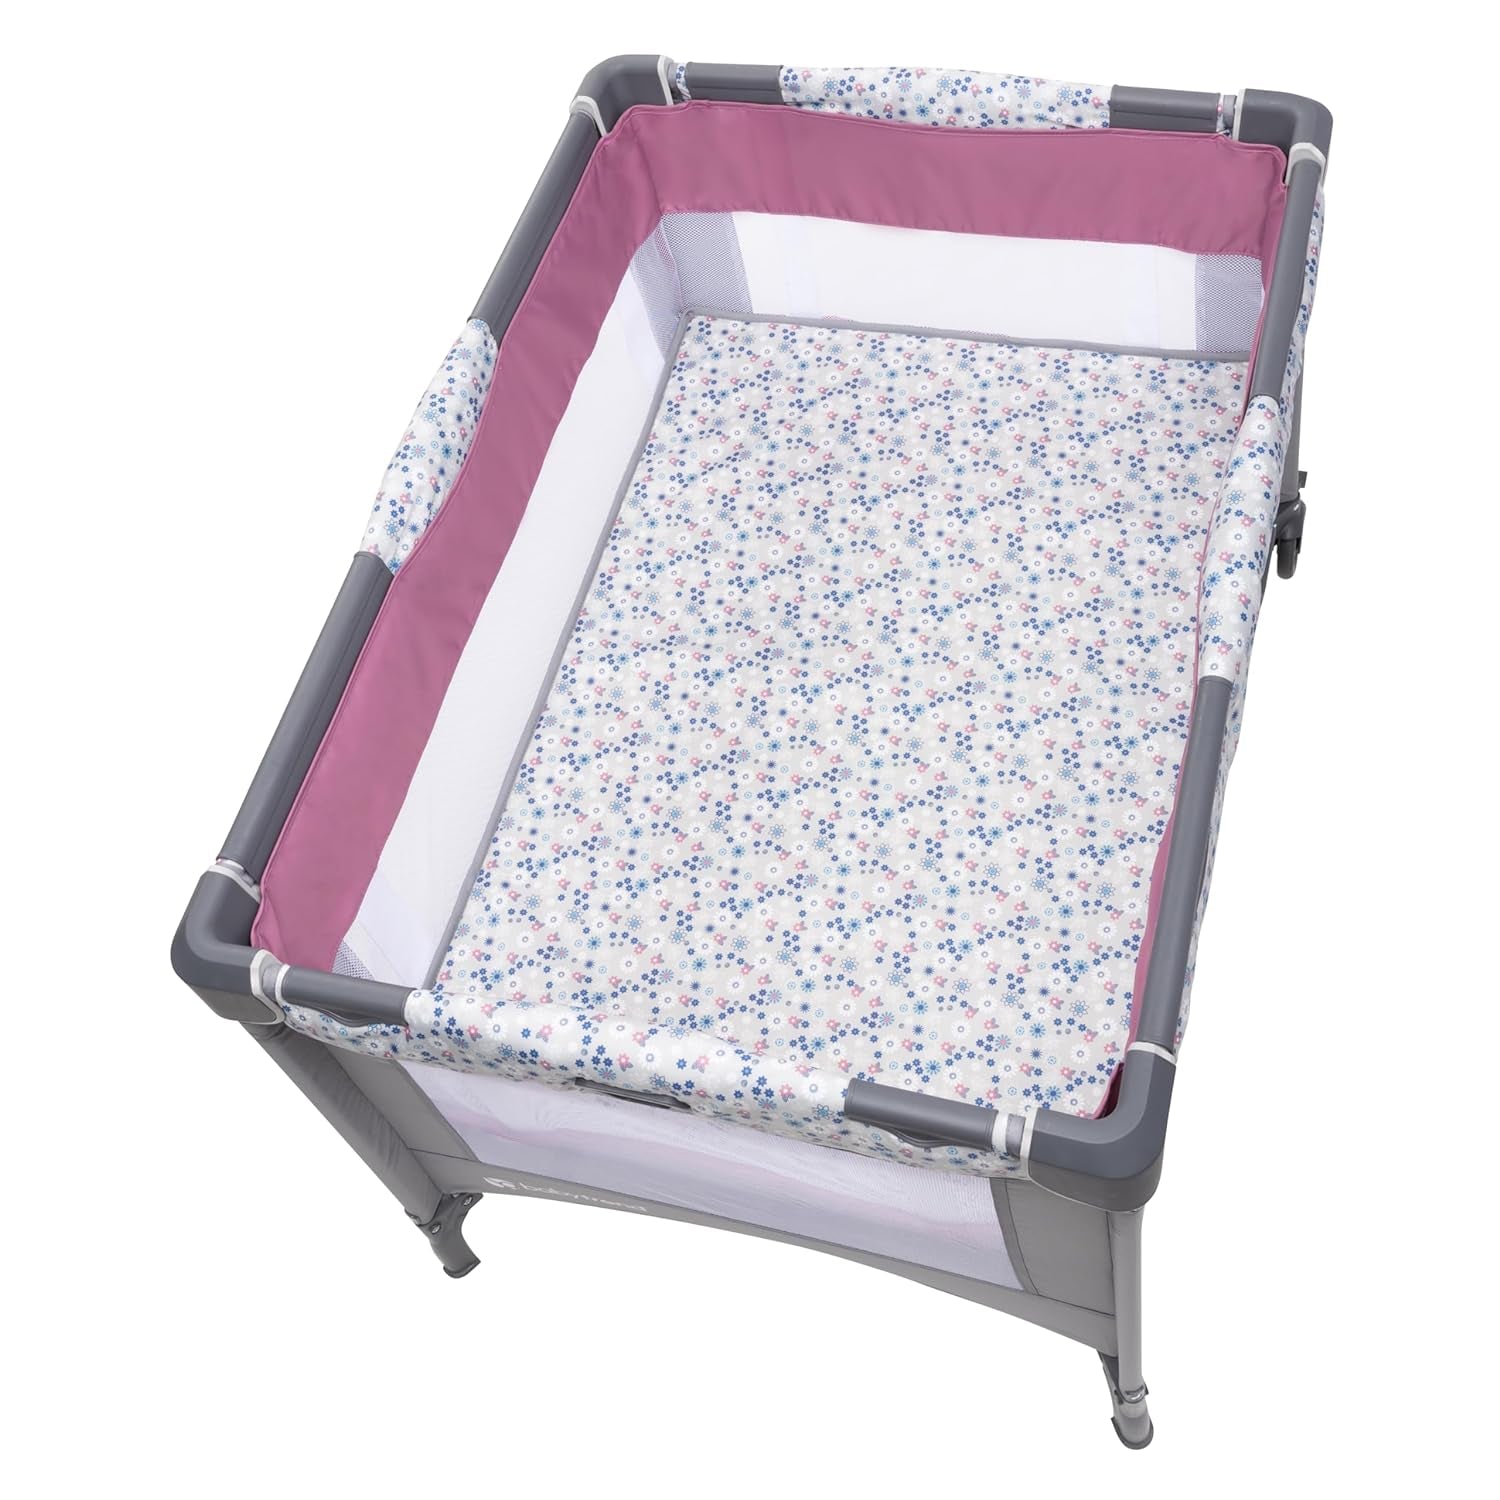 Nursery Suite Ez-Fold Playard with Portable Rocking Lounger and Flip over Changer, Daisy Pink - Design By Technique